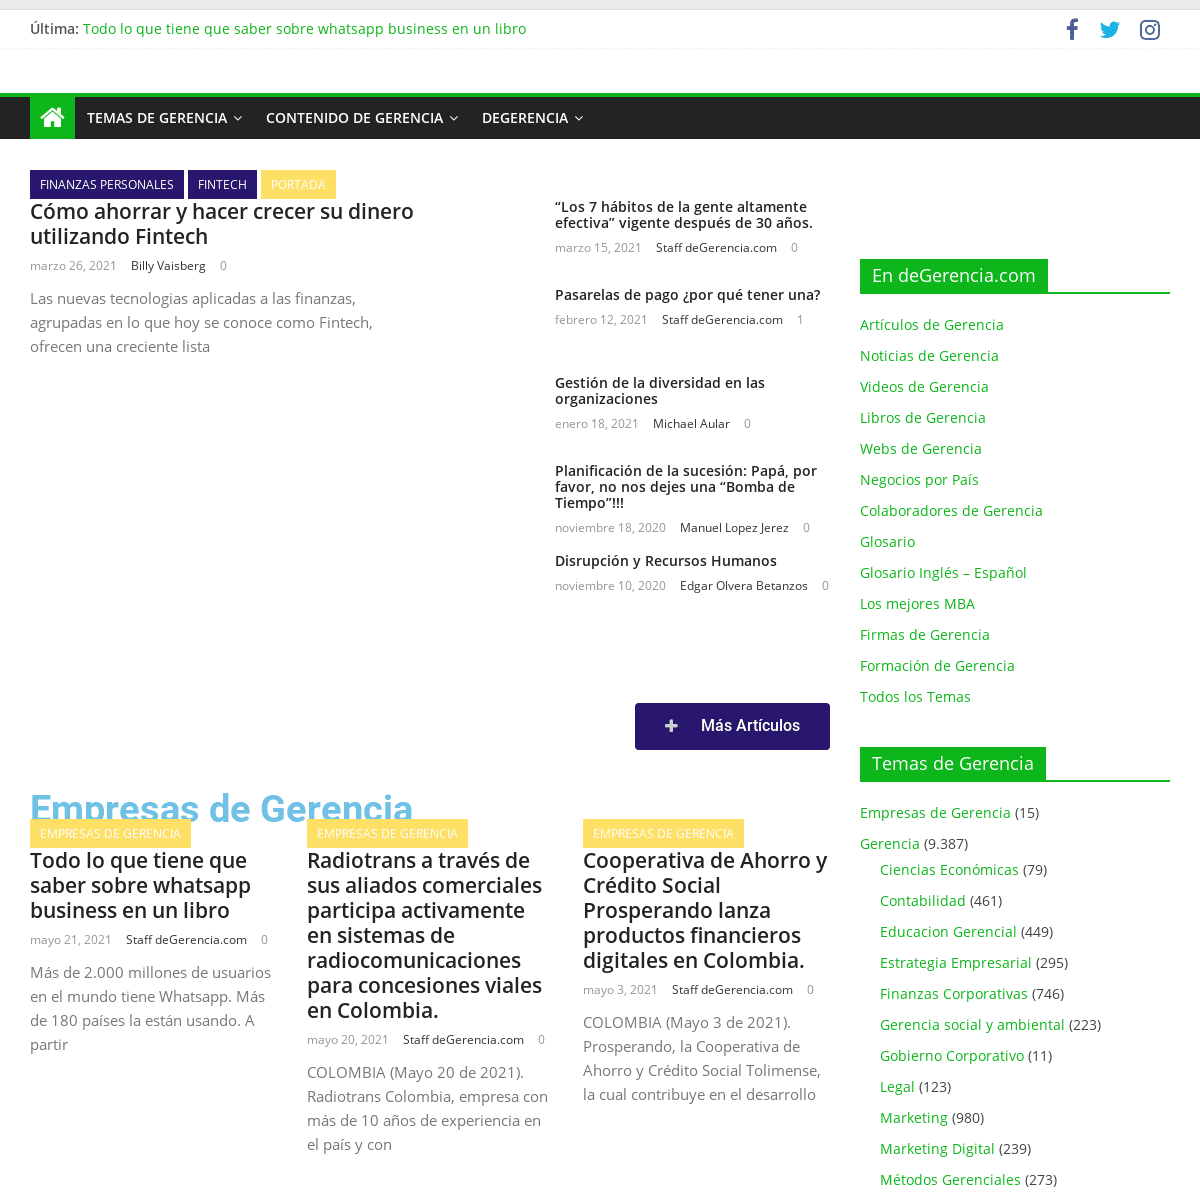 A complete backup of https://degerencia.com